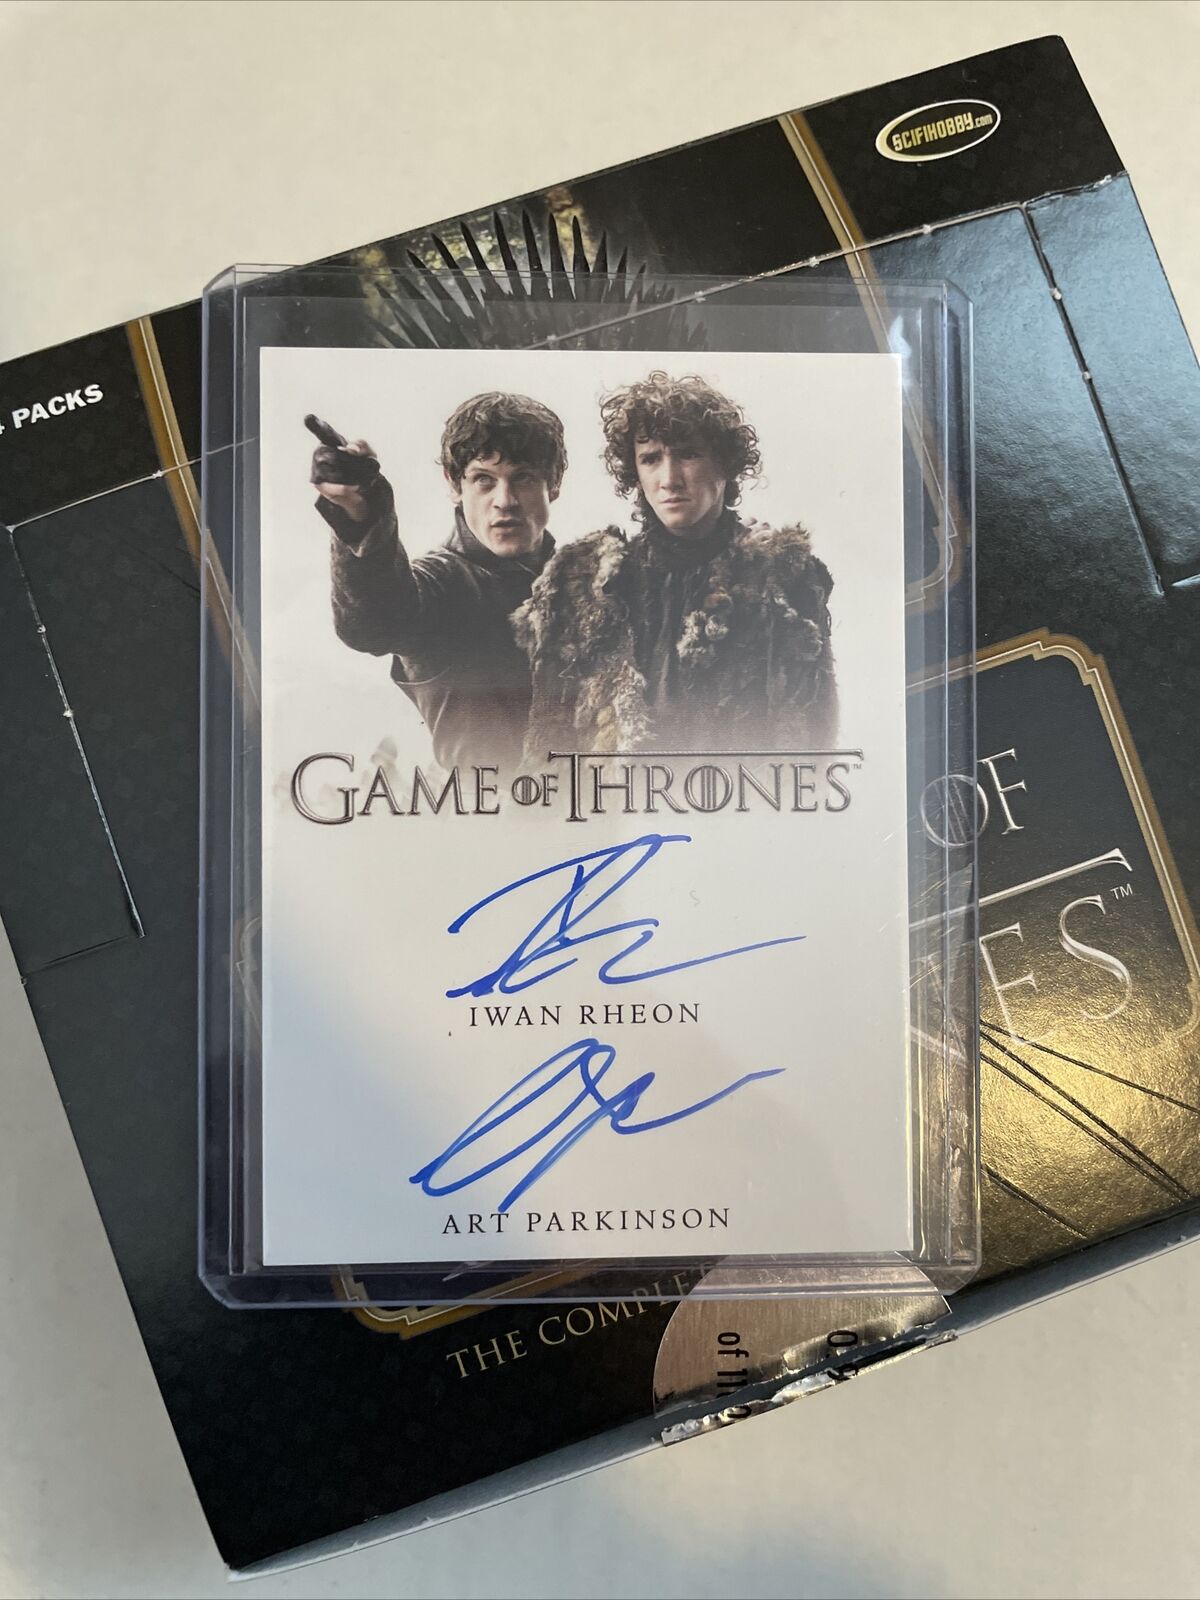 Game of Thrones Complete Series Iwan Rheon Art Parkinson Dual autograph Bolton